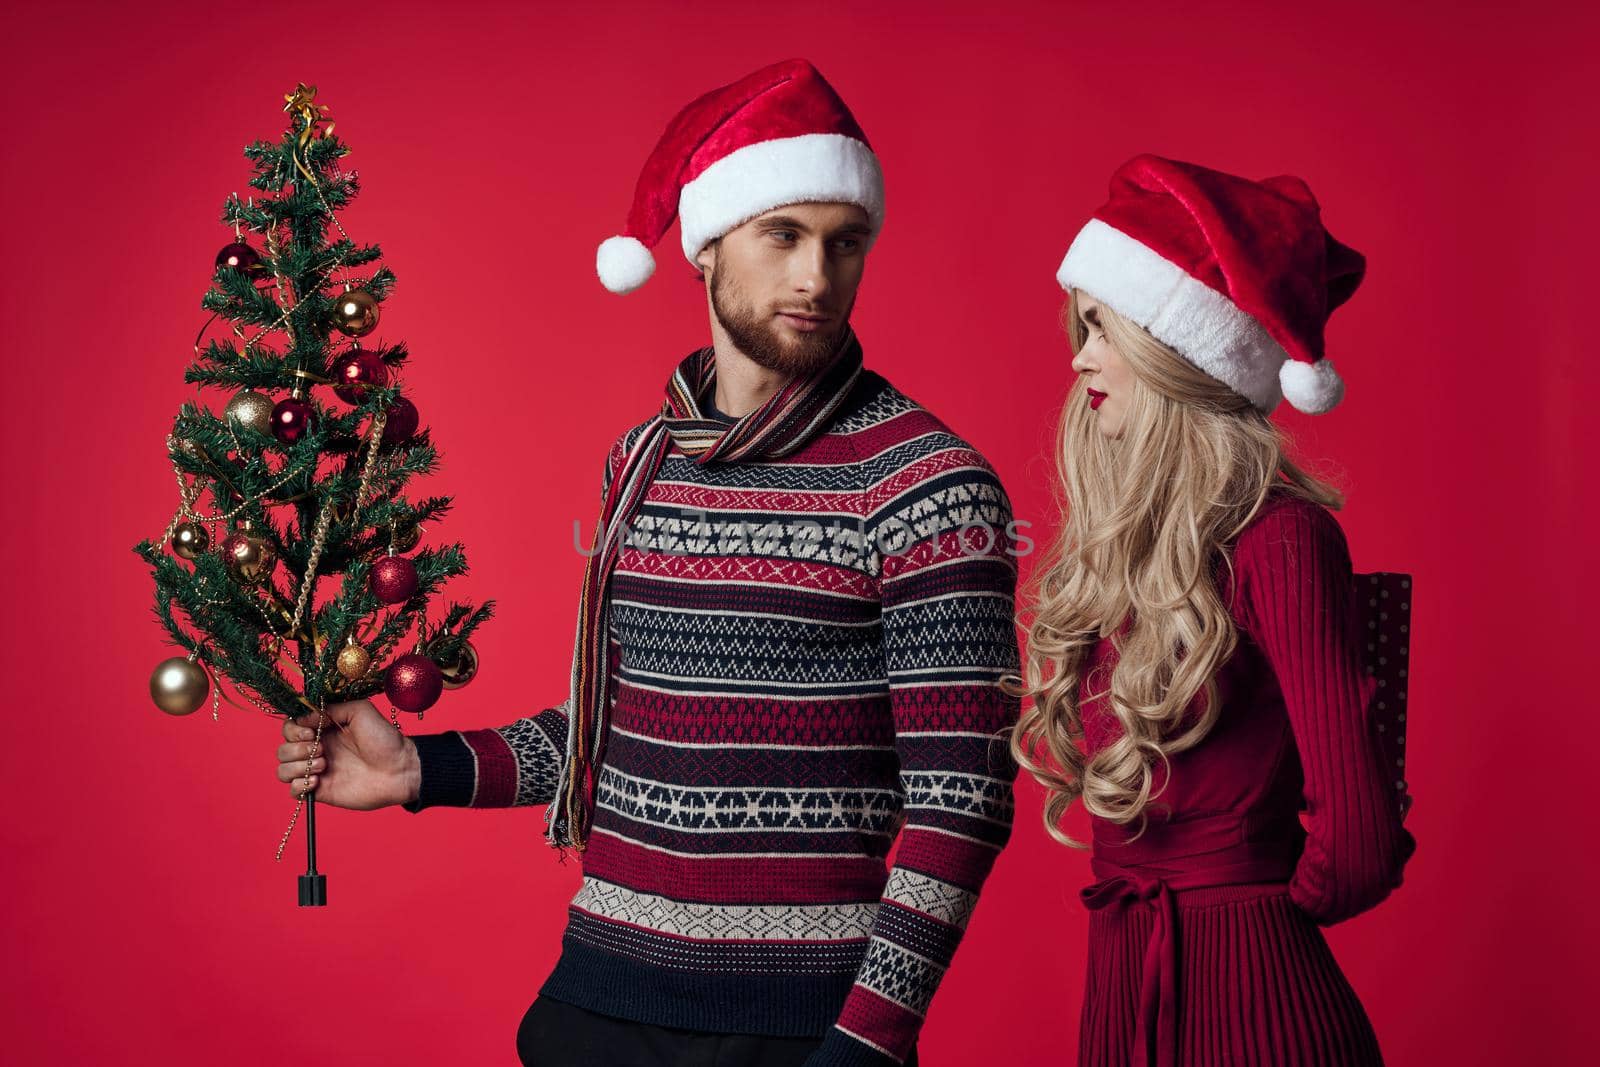 young couple christmas decorations holiday posing red background. High quality photo